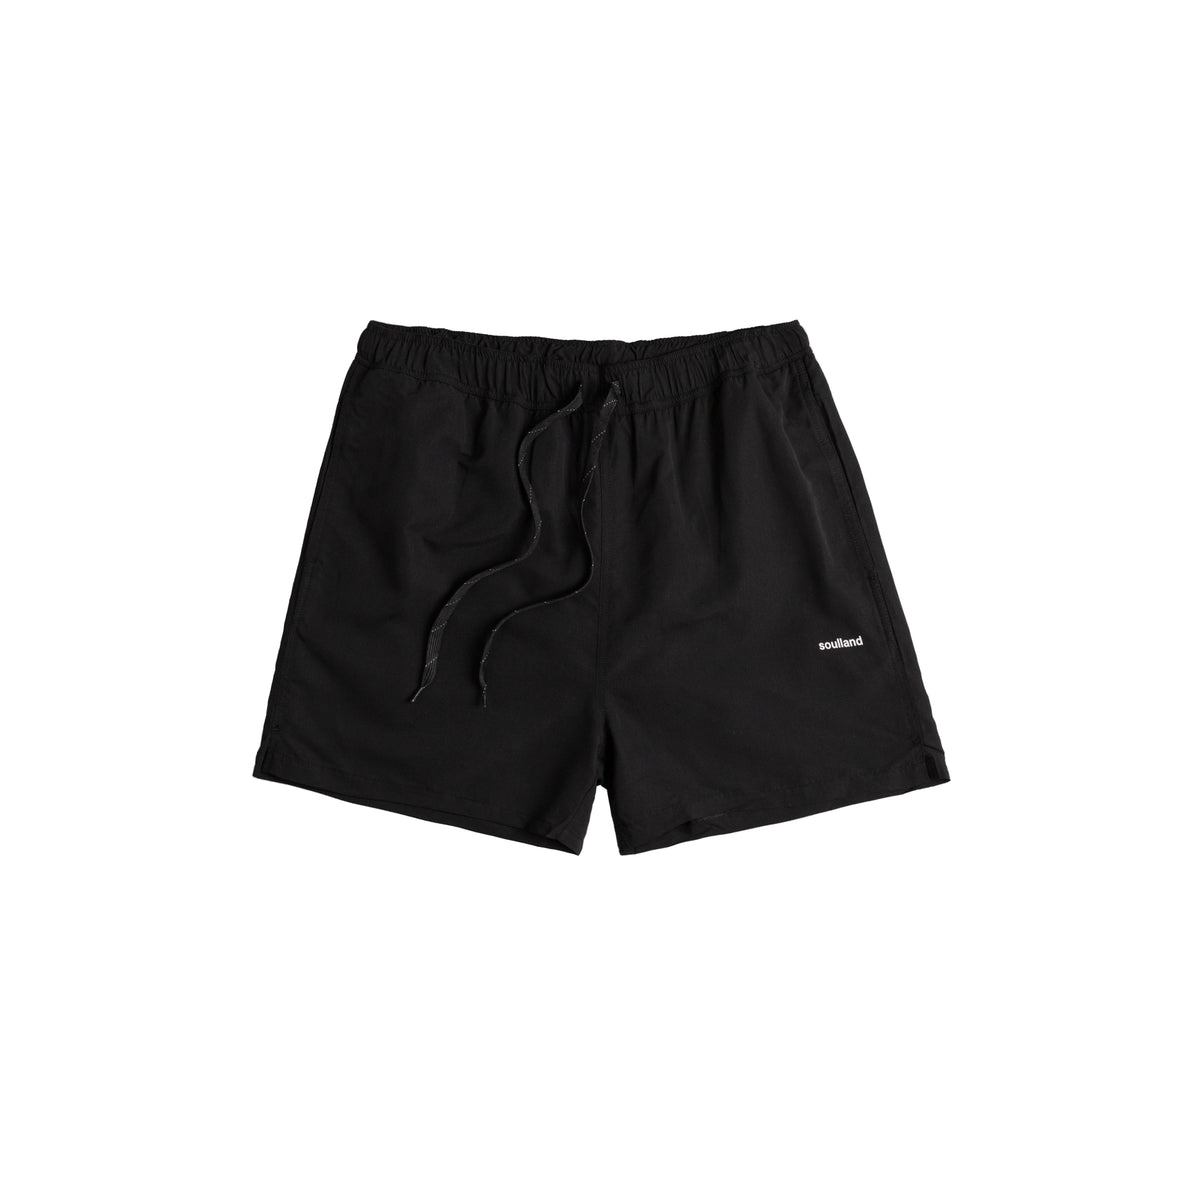 Soulland William Swim Shorts – buy now at Asphaltgold Online Store!